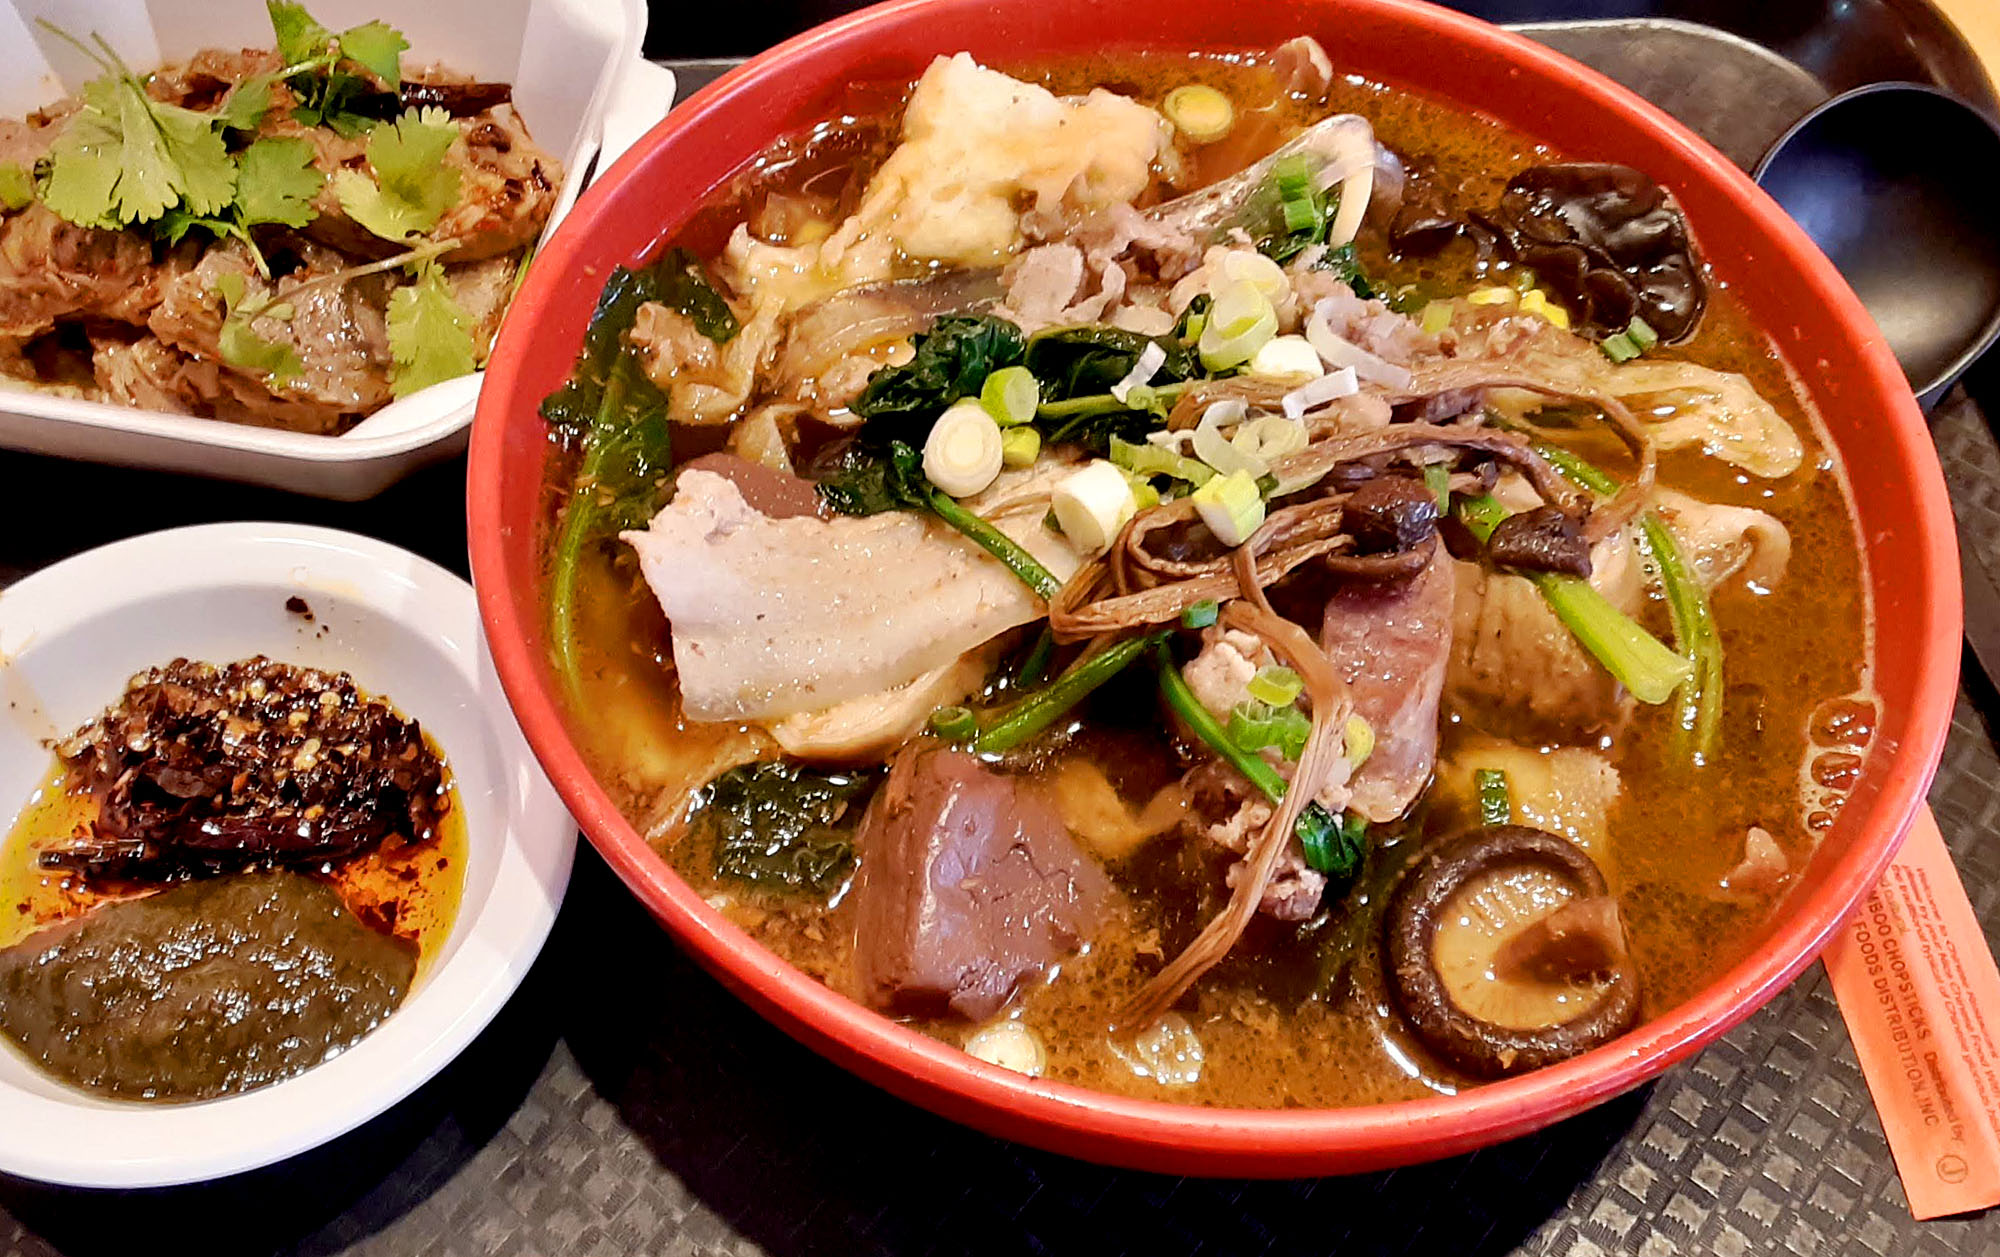 A huge bowl of meaty ramen with two small sides. Photo by Paul Young.